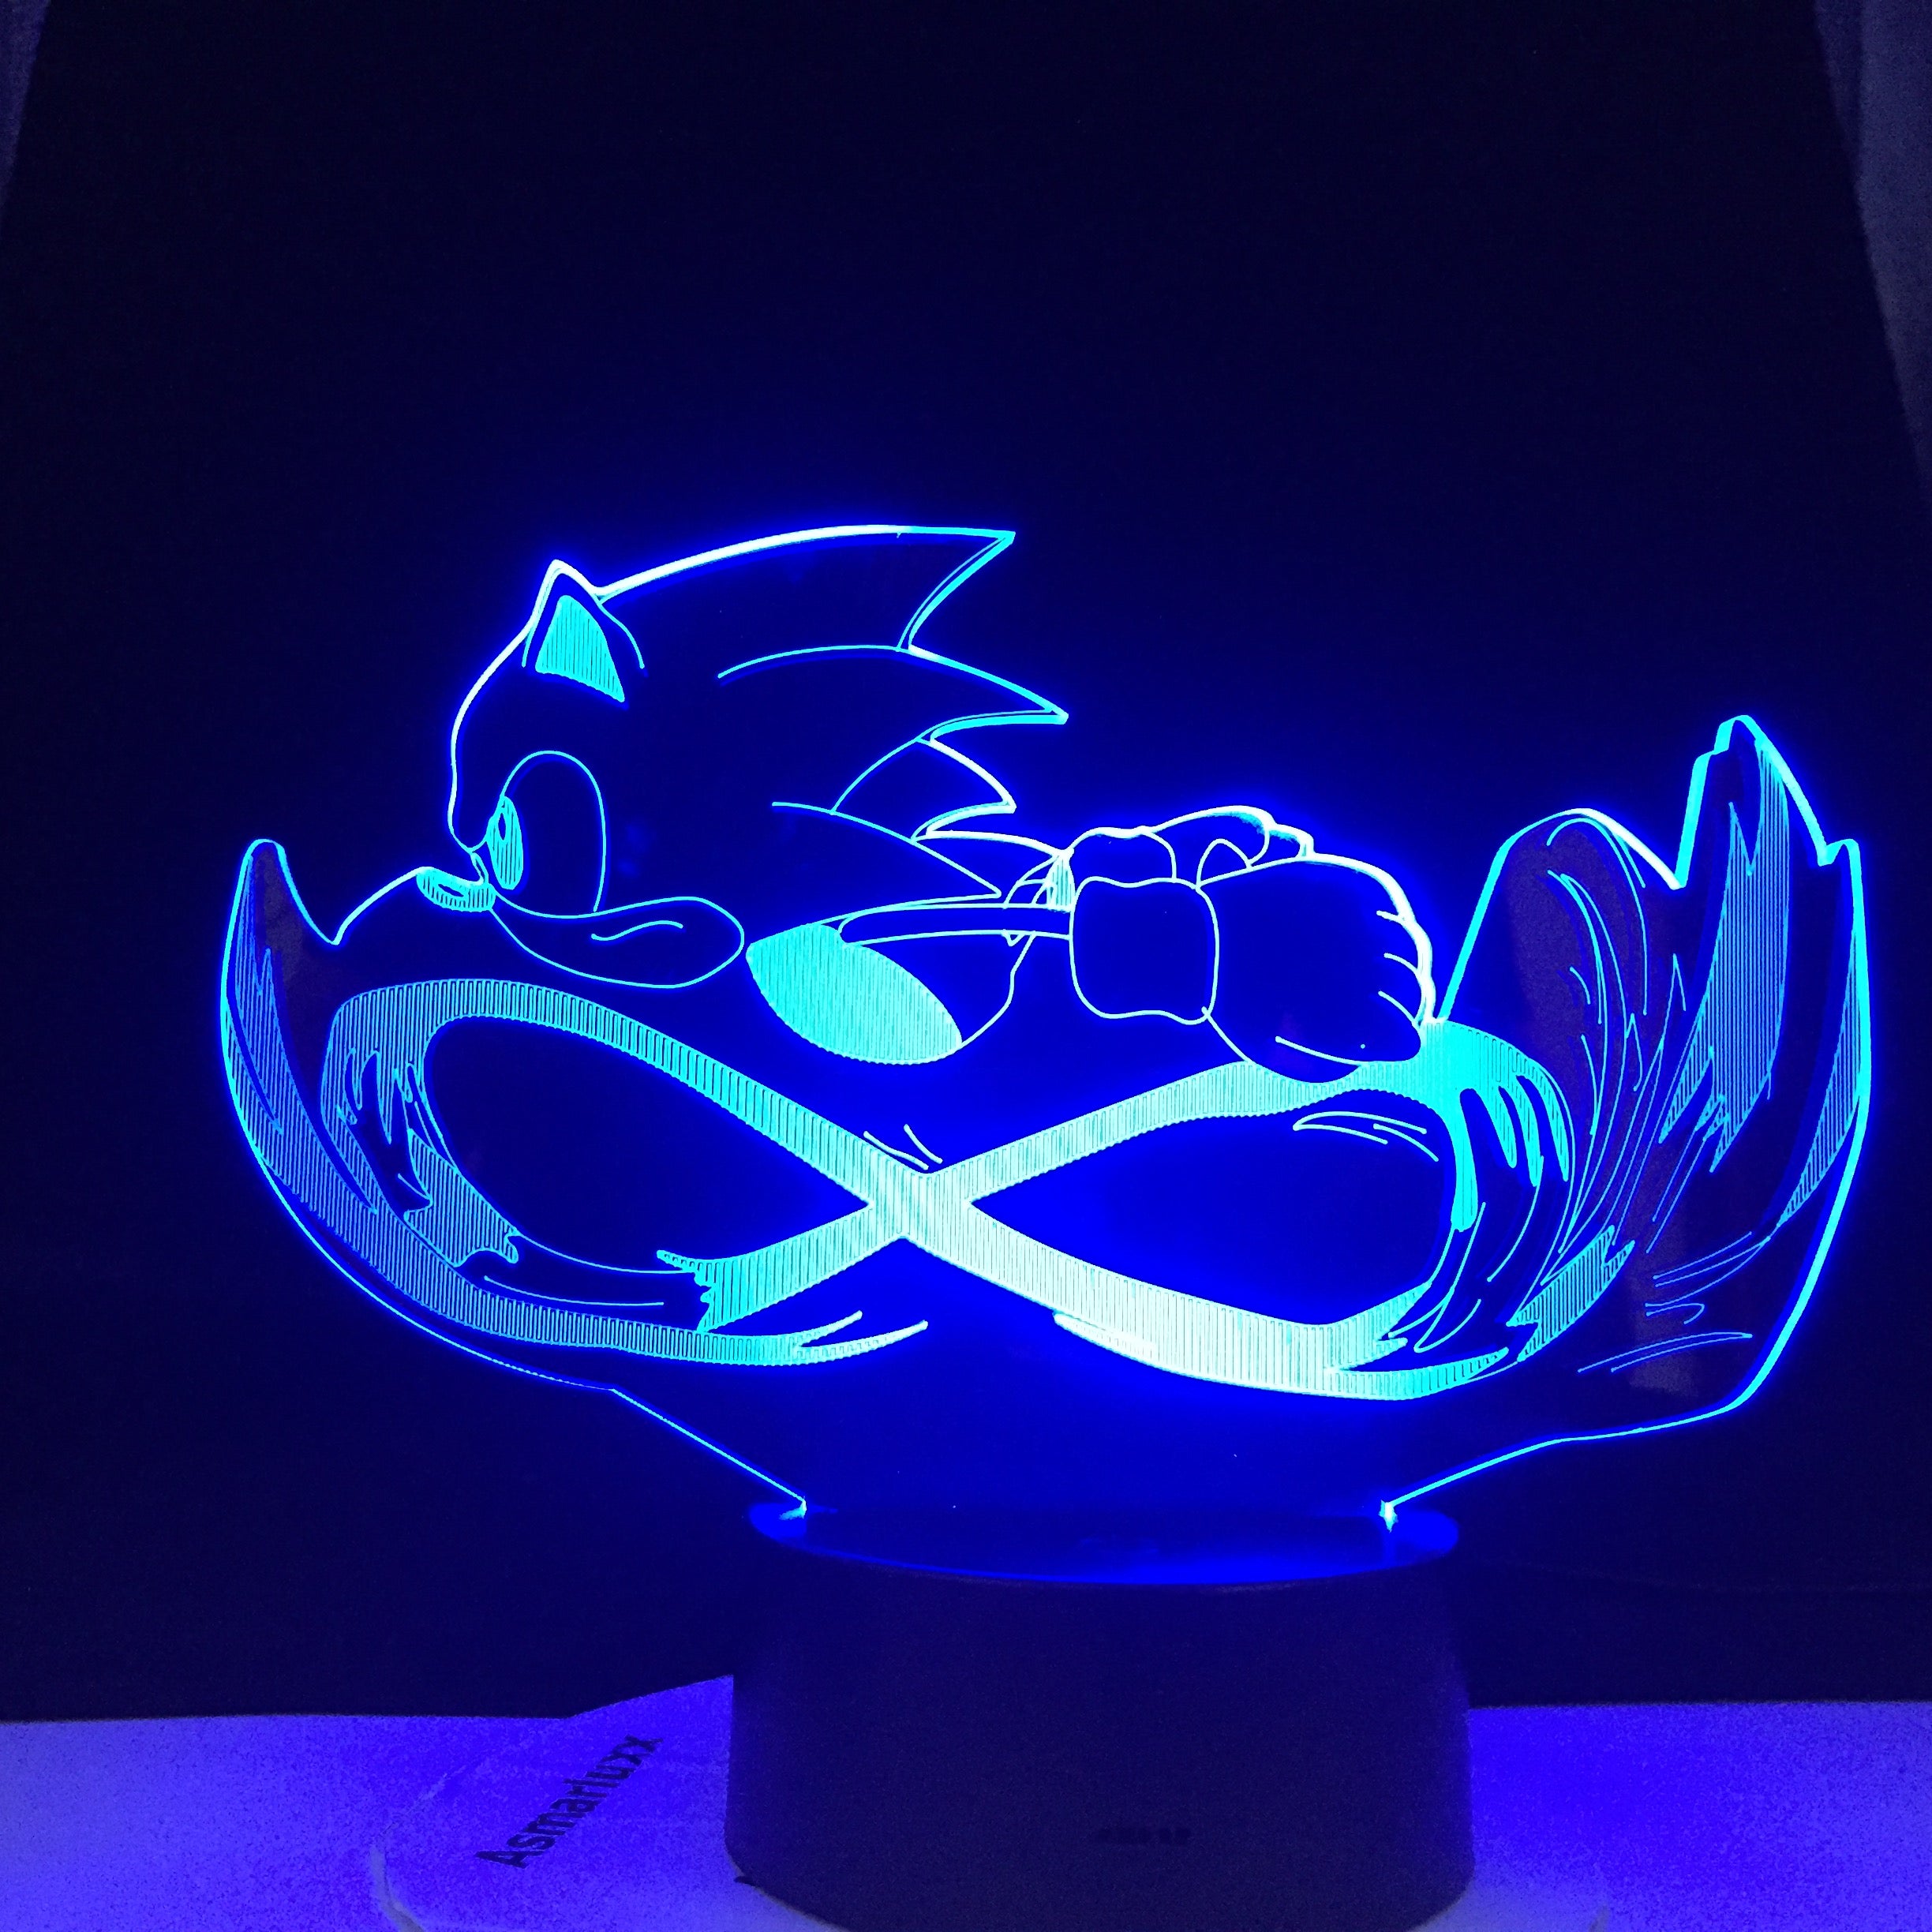 Sonic 3D Cartoon Touch Table Lamp 16 Colorful Acrylic Visual Illusion USB LED Lights Bedroom Decoration Lamparas Baby Kids Gift